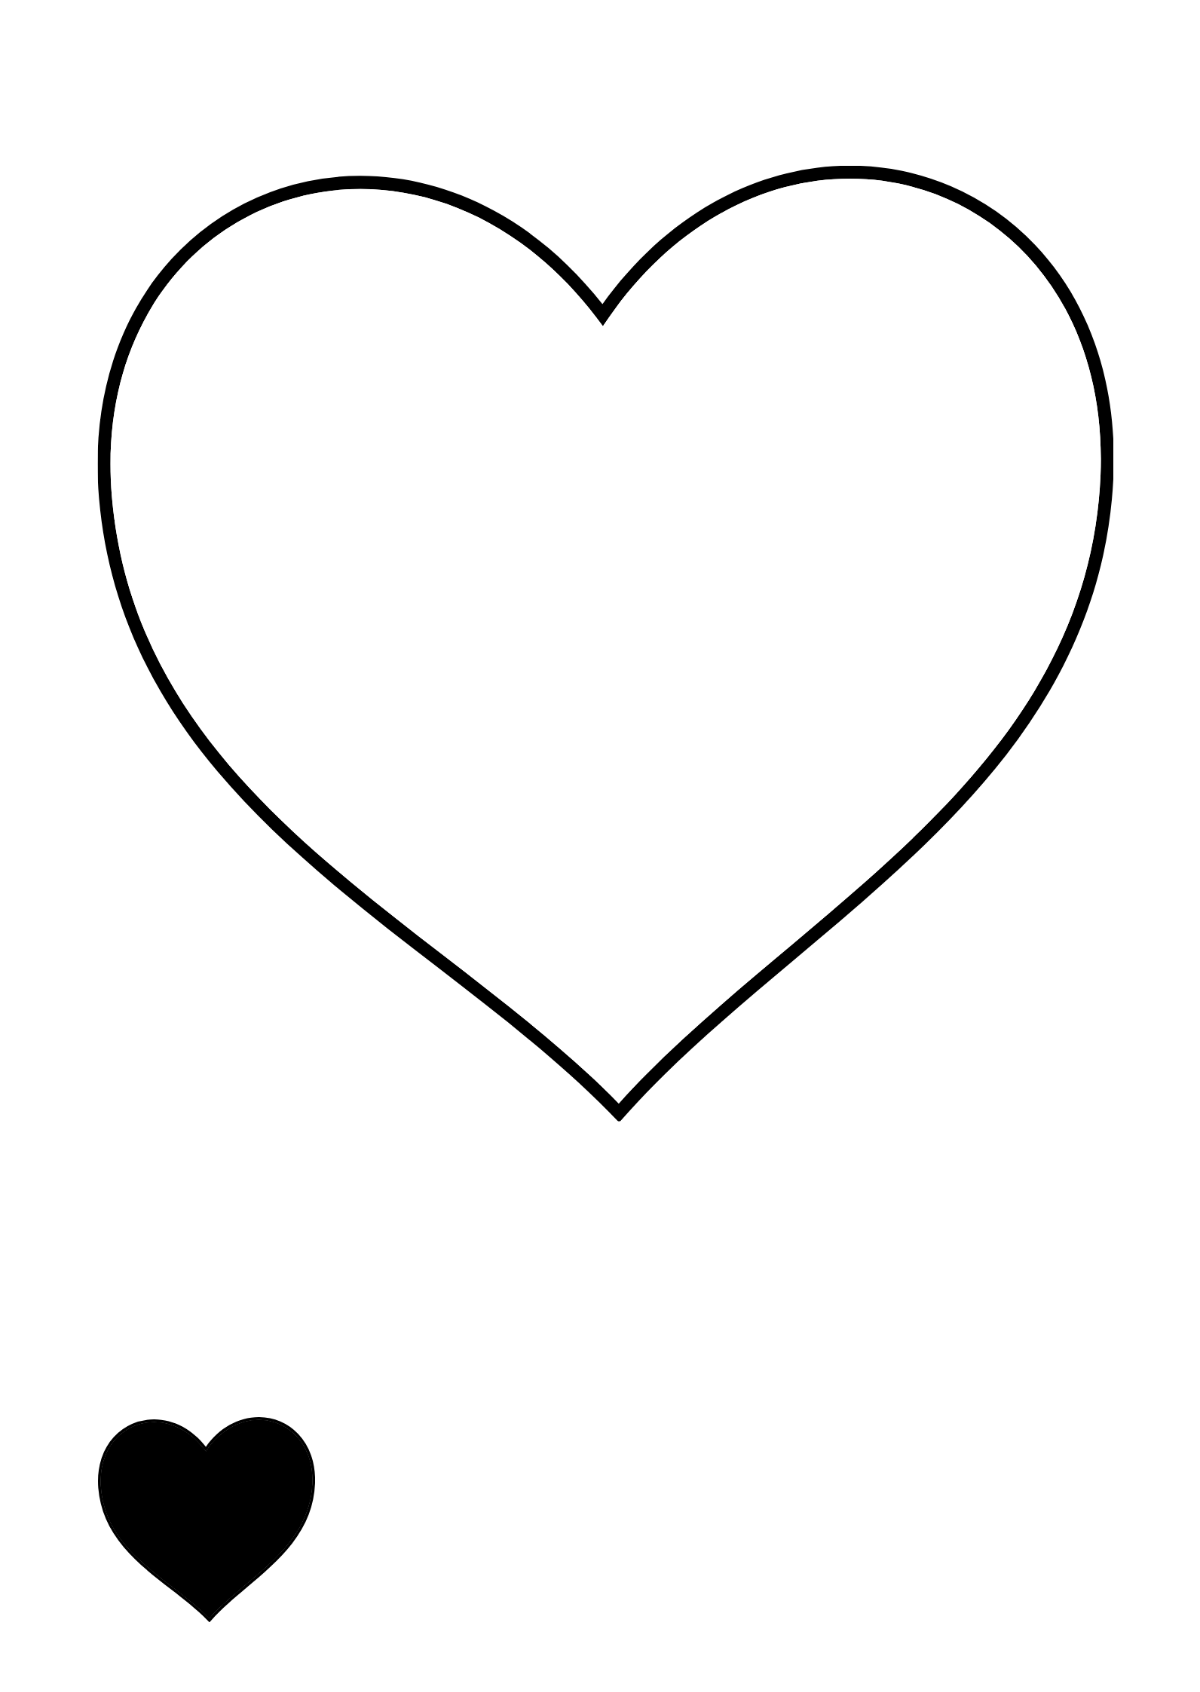 Black Heart Shape Coloring Page Template